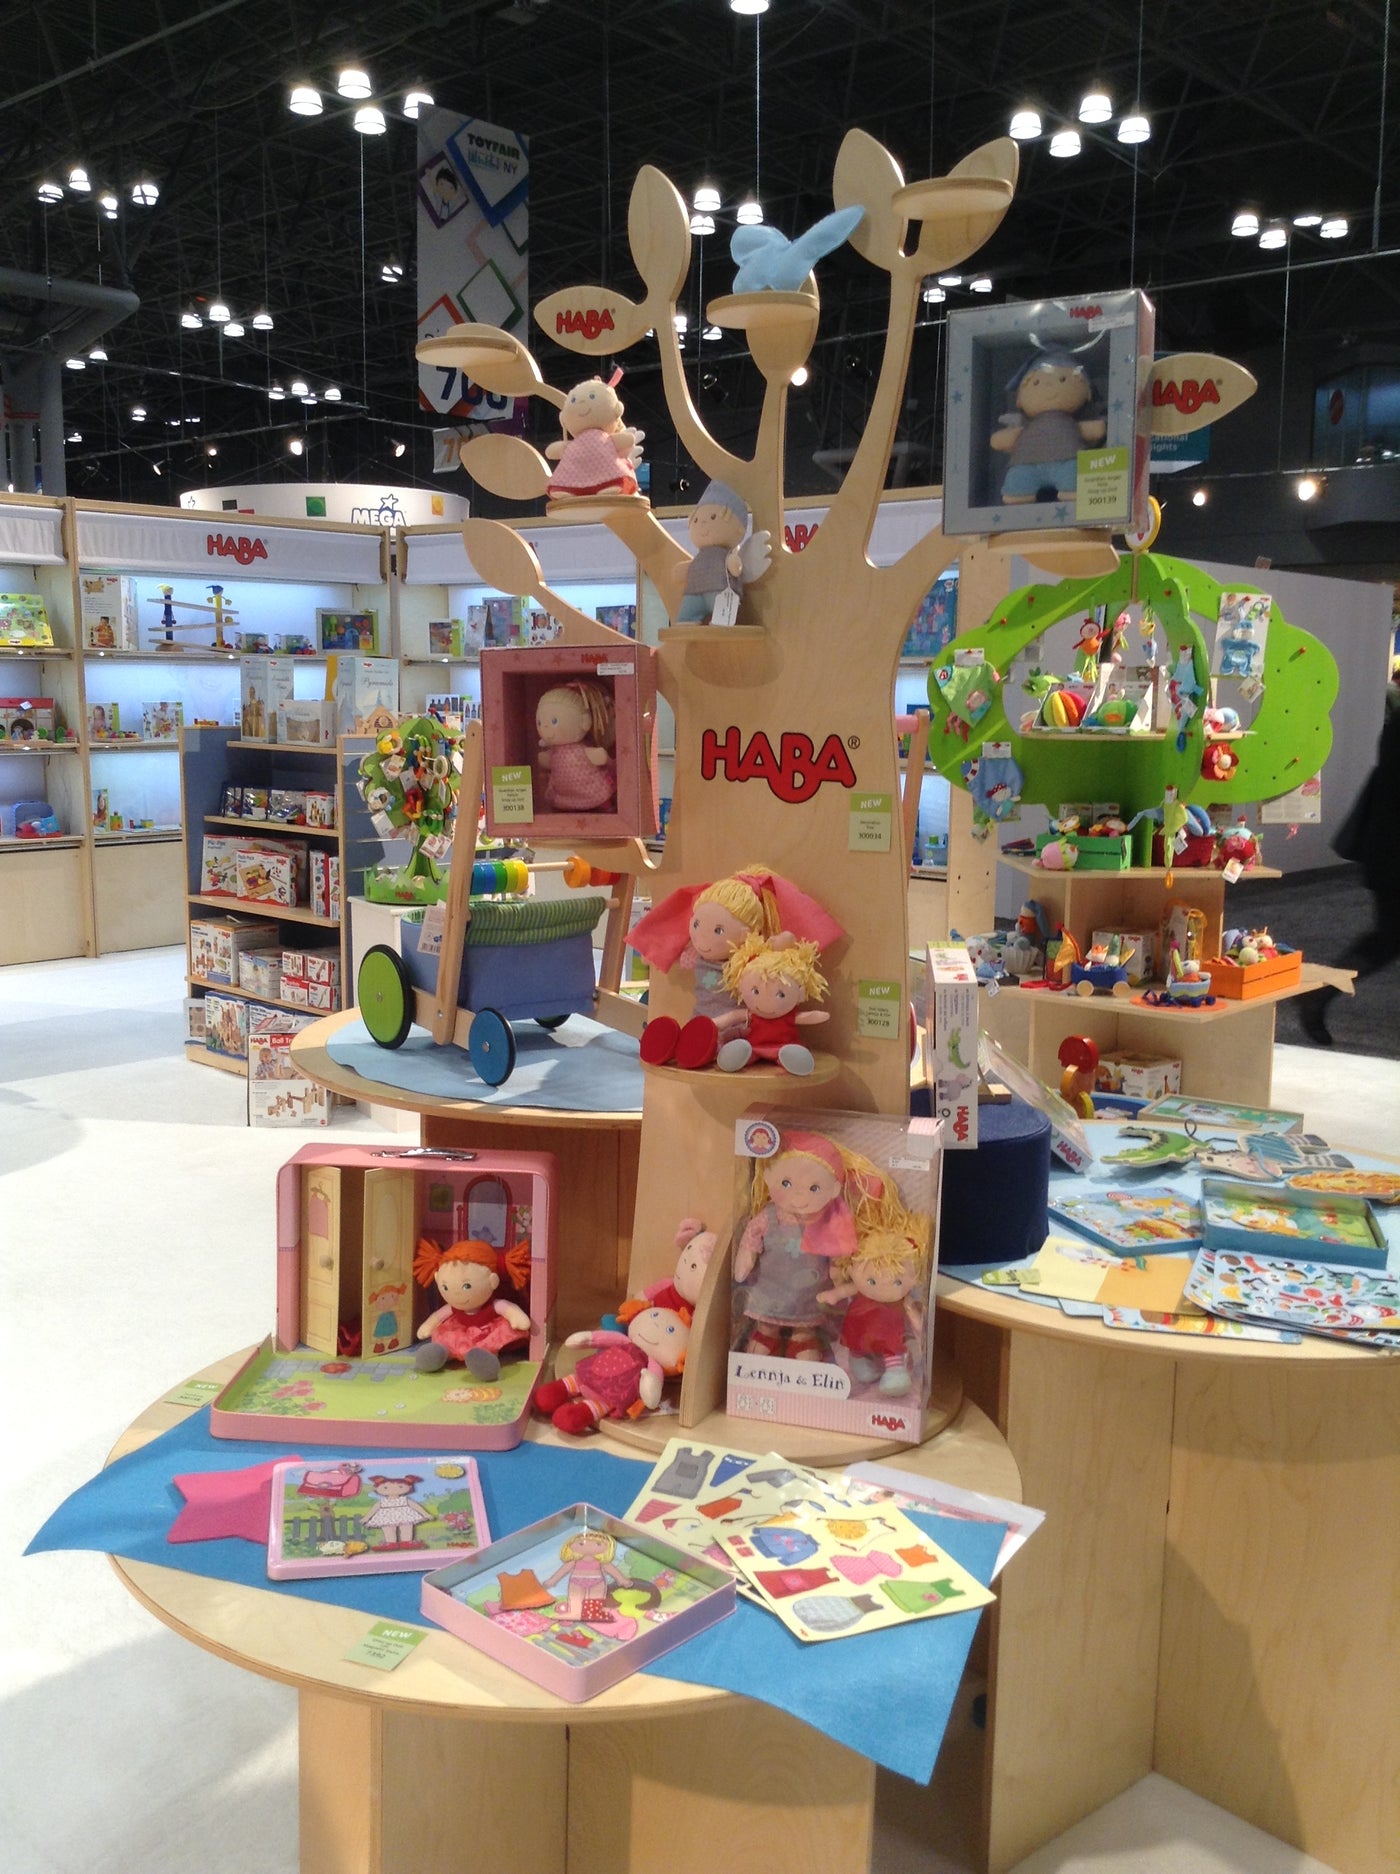 ApartmentTherapy.com - HABA & Lilliputiens named "Toy Fair Favorites"